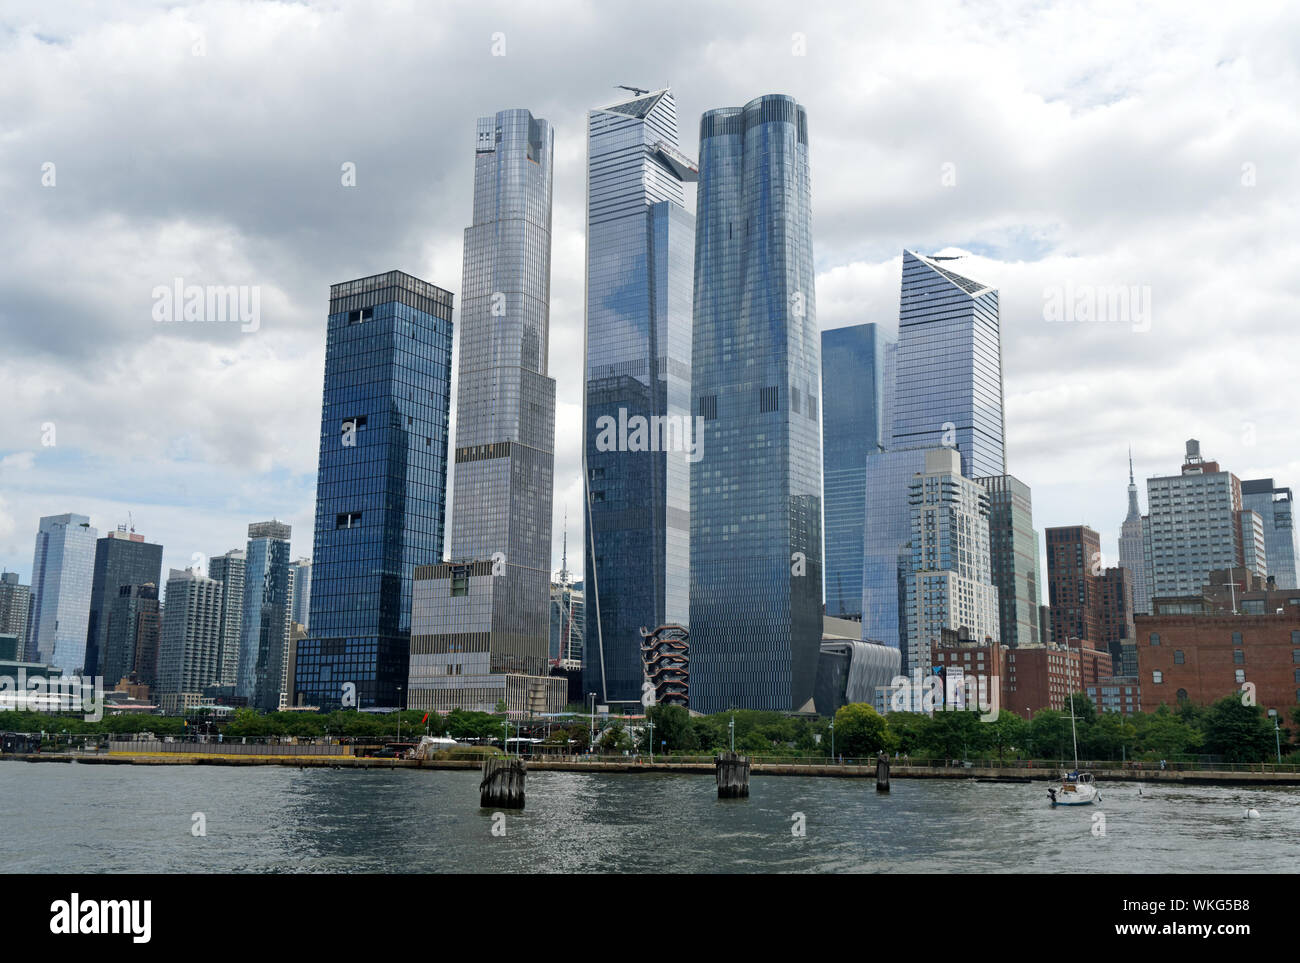 Hudson Yards in Chelsea on the west side of Manhattan overlooking the Hudson River, is the largest private real estate development in the U.S.by area. Stock Photo